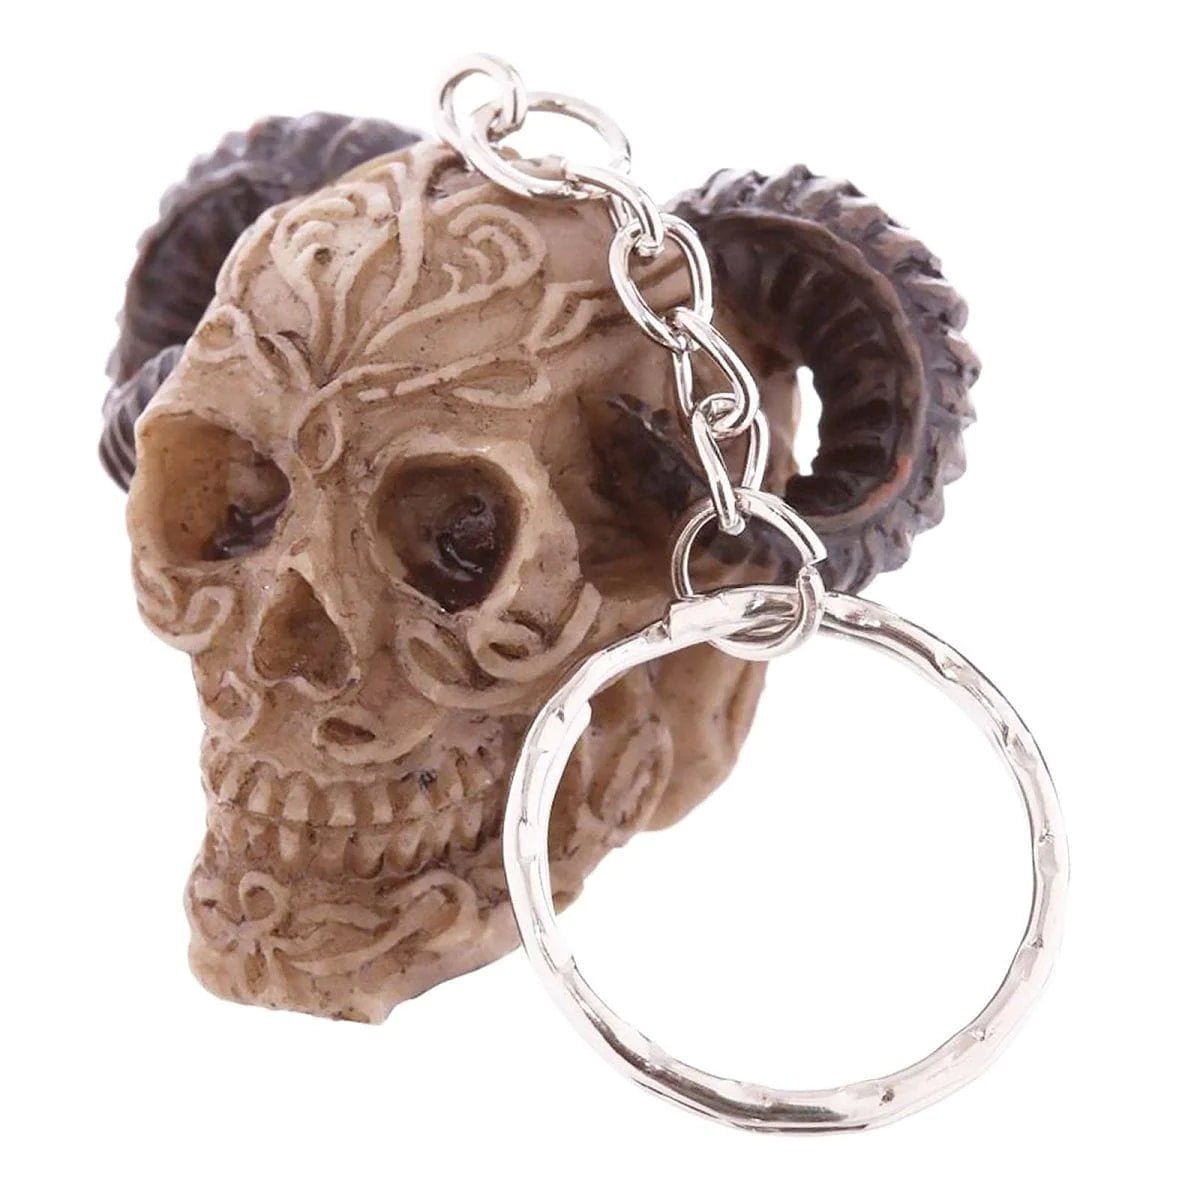 Skull Keyring Halloween Resin Fun Gothic Keychain Gift - Bag Charms & Keyrings by Fashion Accessories